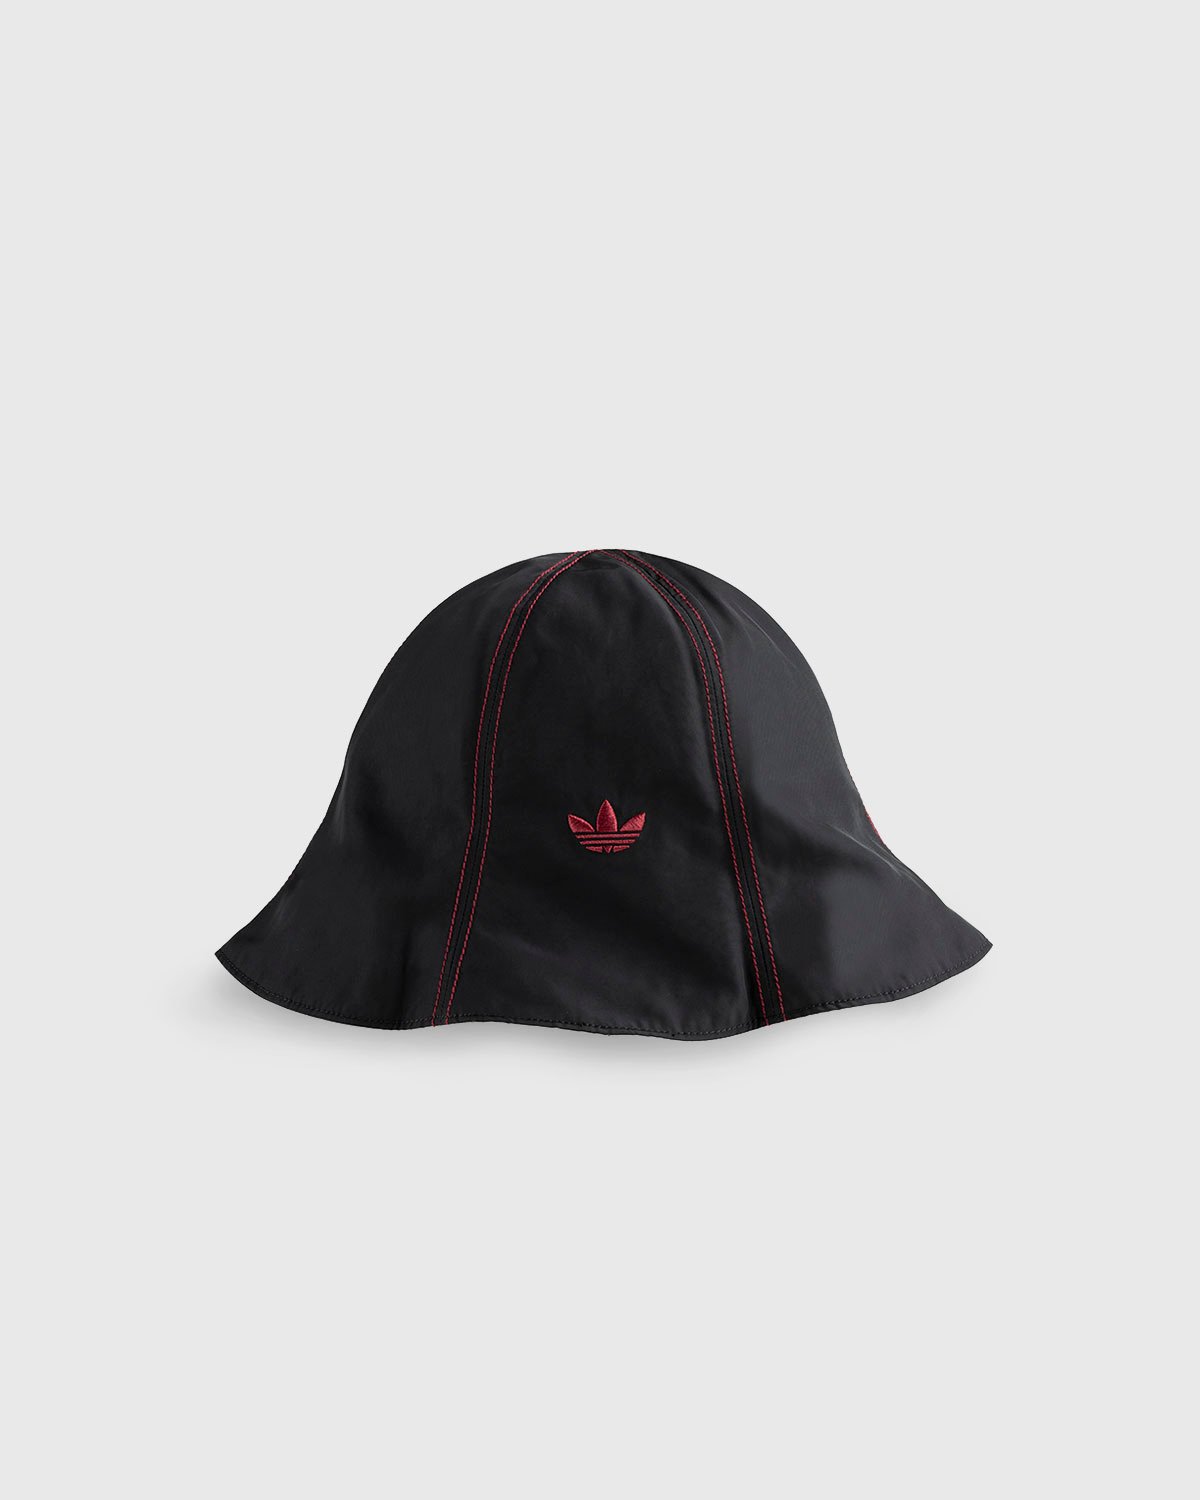 Adidas x Wales Bonner - Sunhat Black Burgundy - Accessories - Red - Image 2